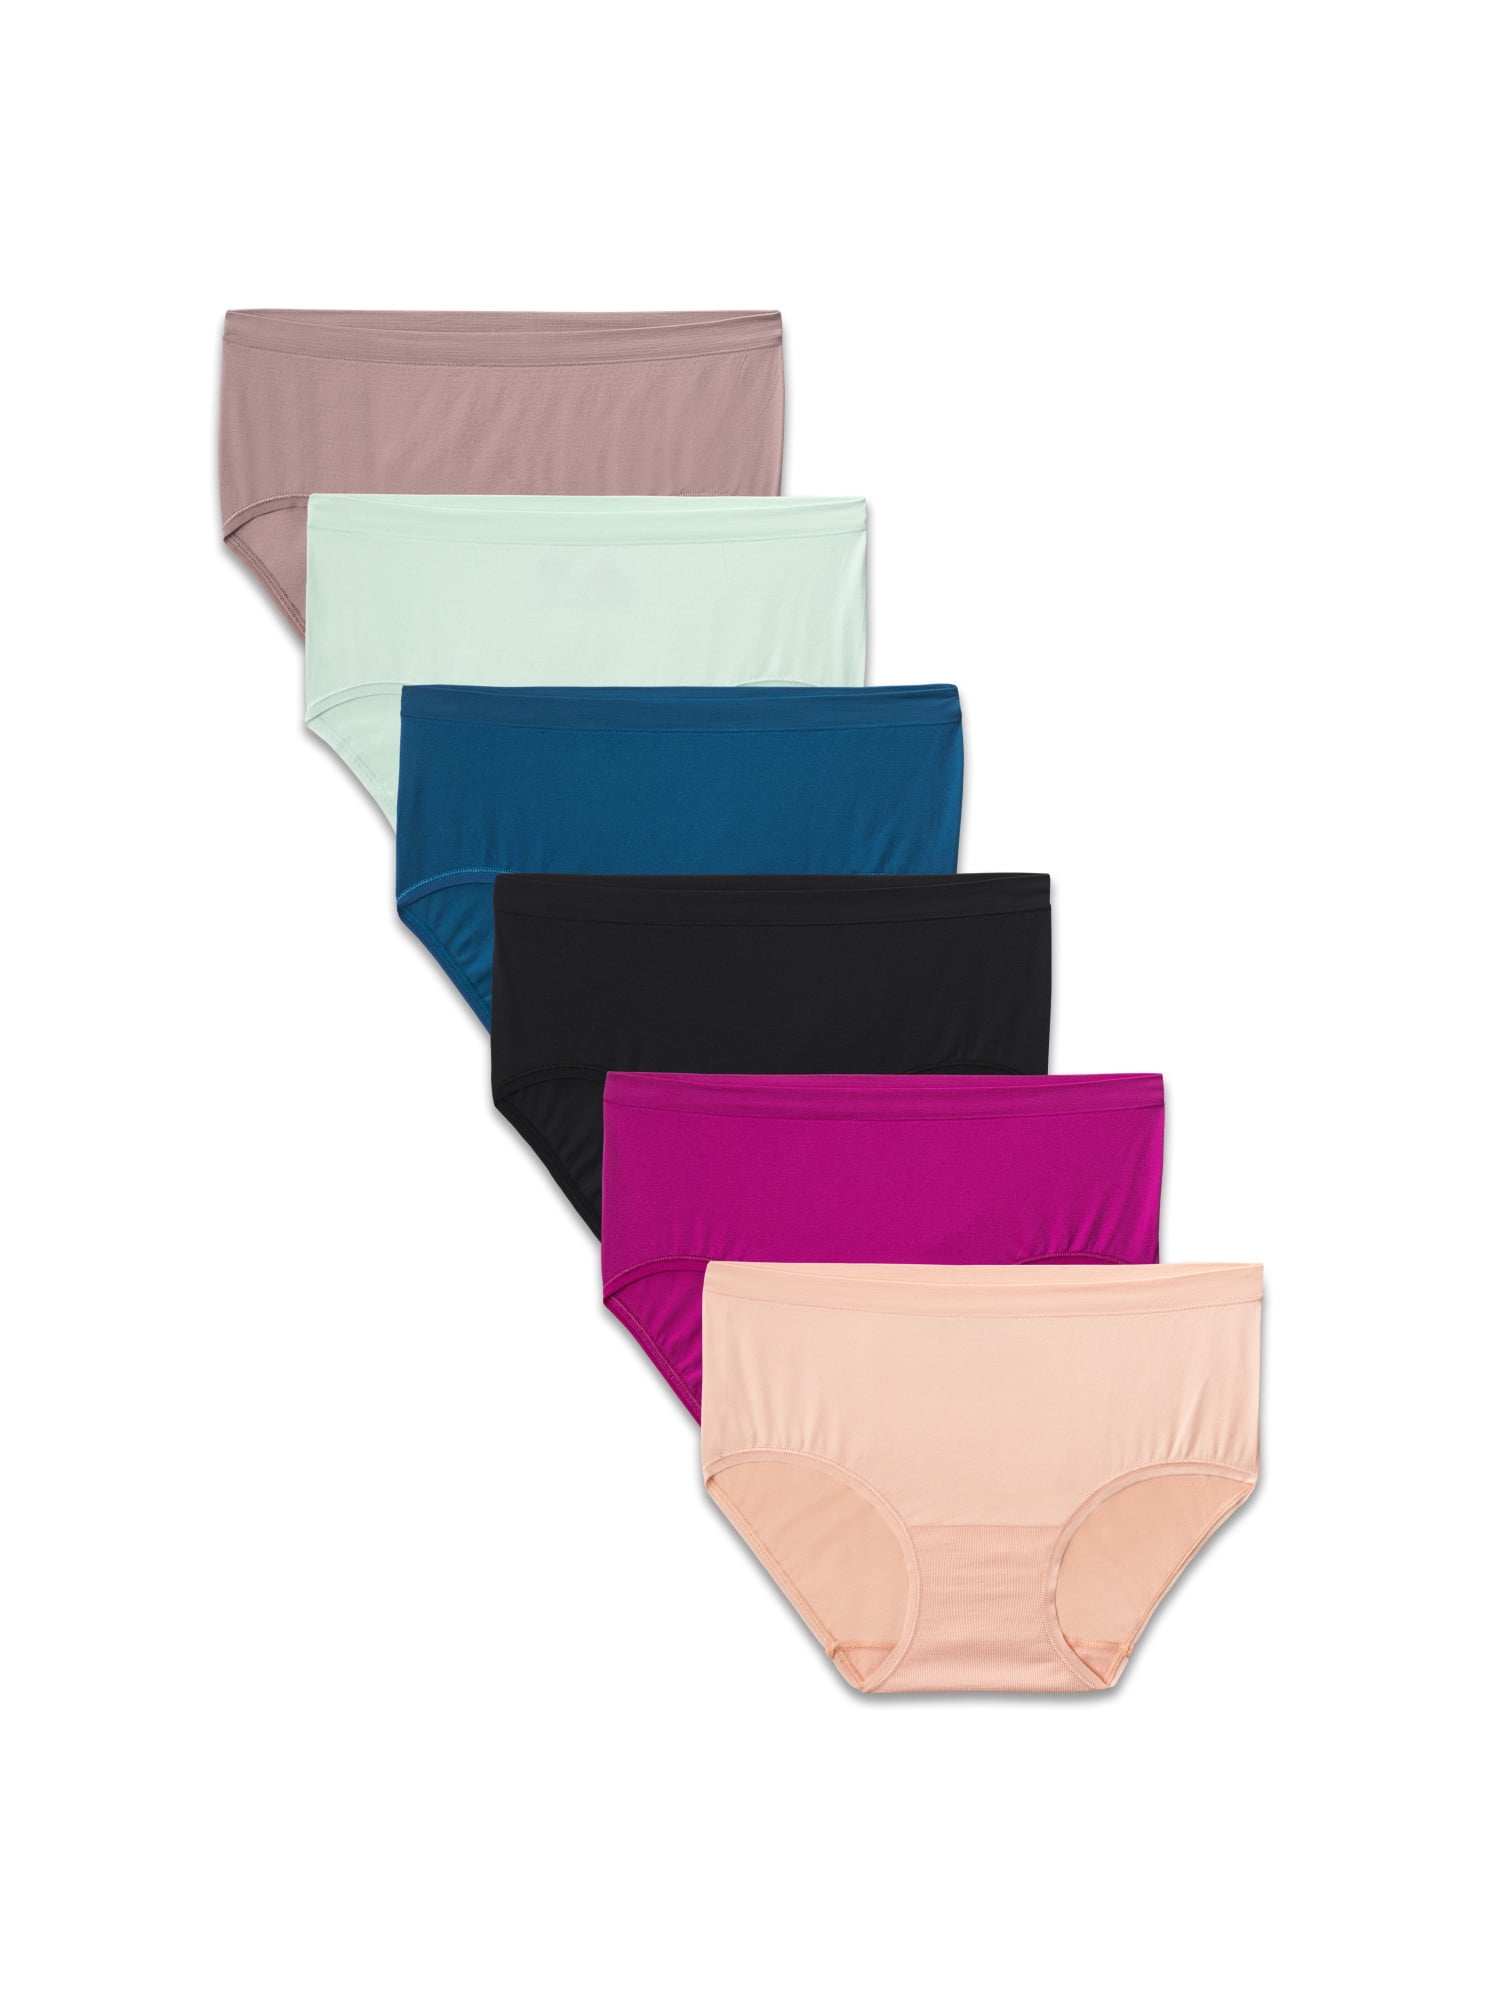 Women's Seamless Low Rise Brief, 6 Pack 